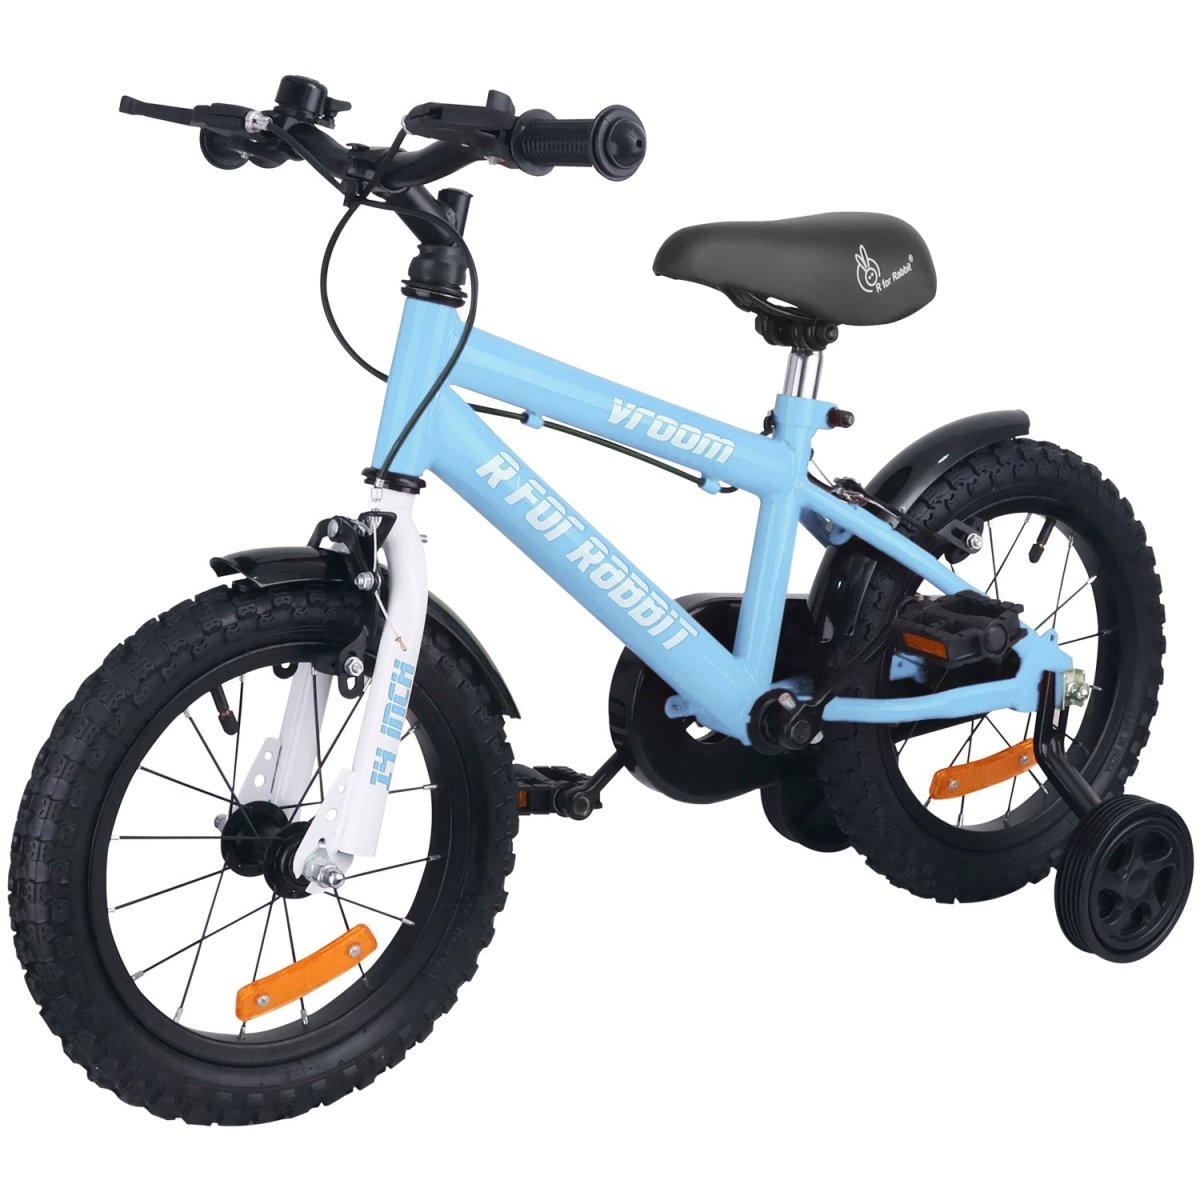 R for Rabbit Vroom Bicycle Lake Blue- 14Inch - BLVRLB14